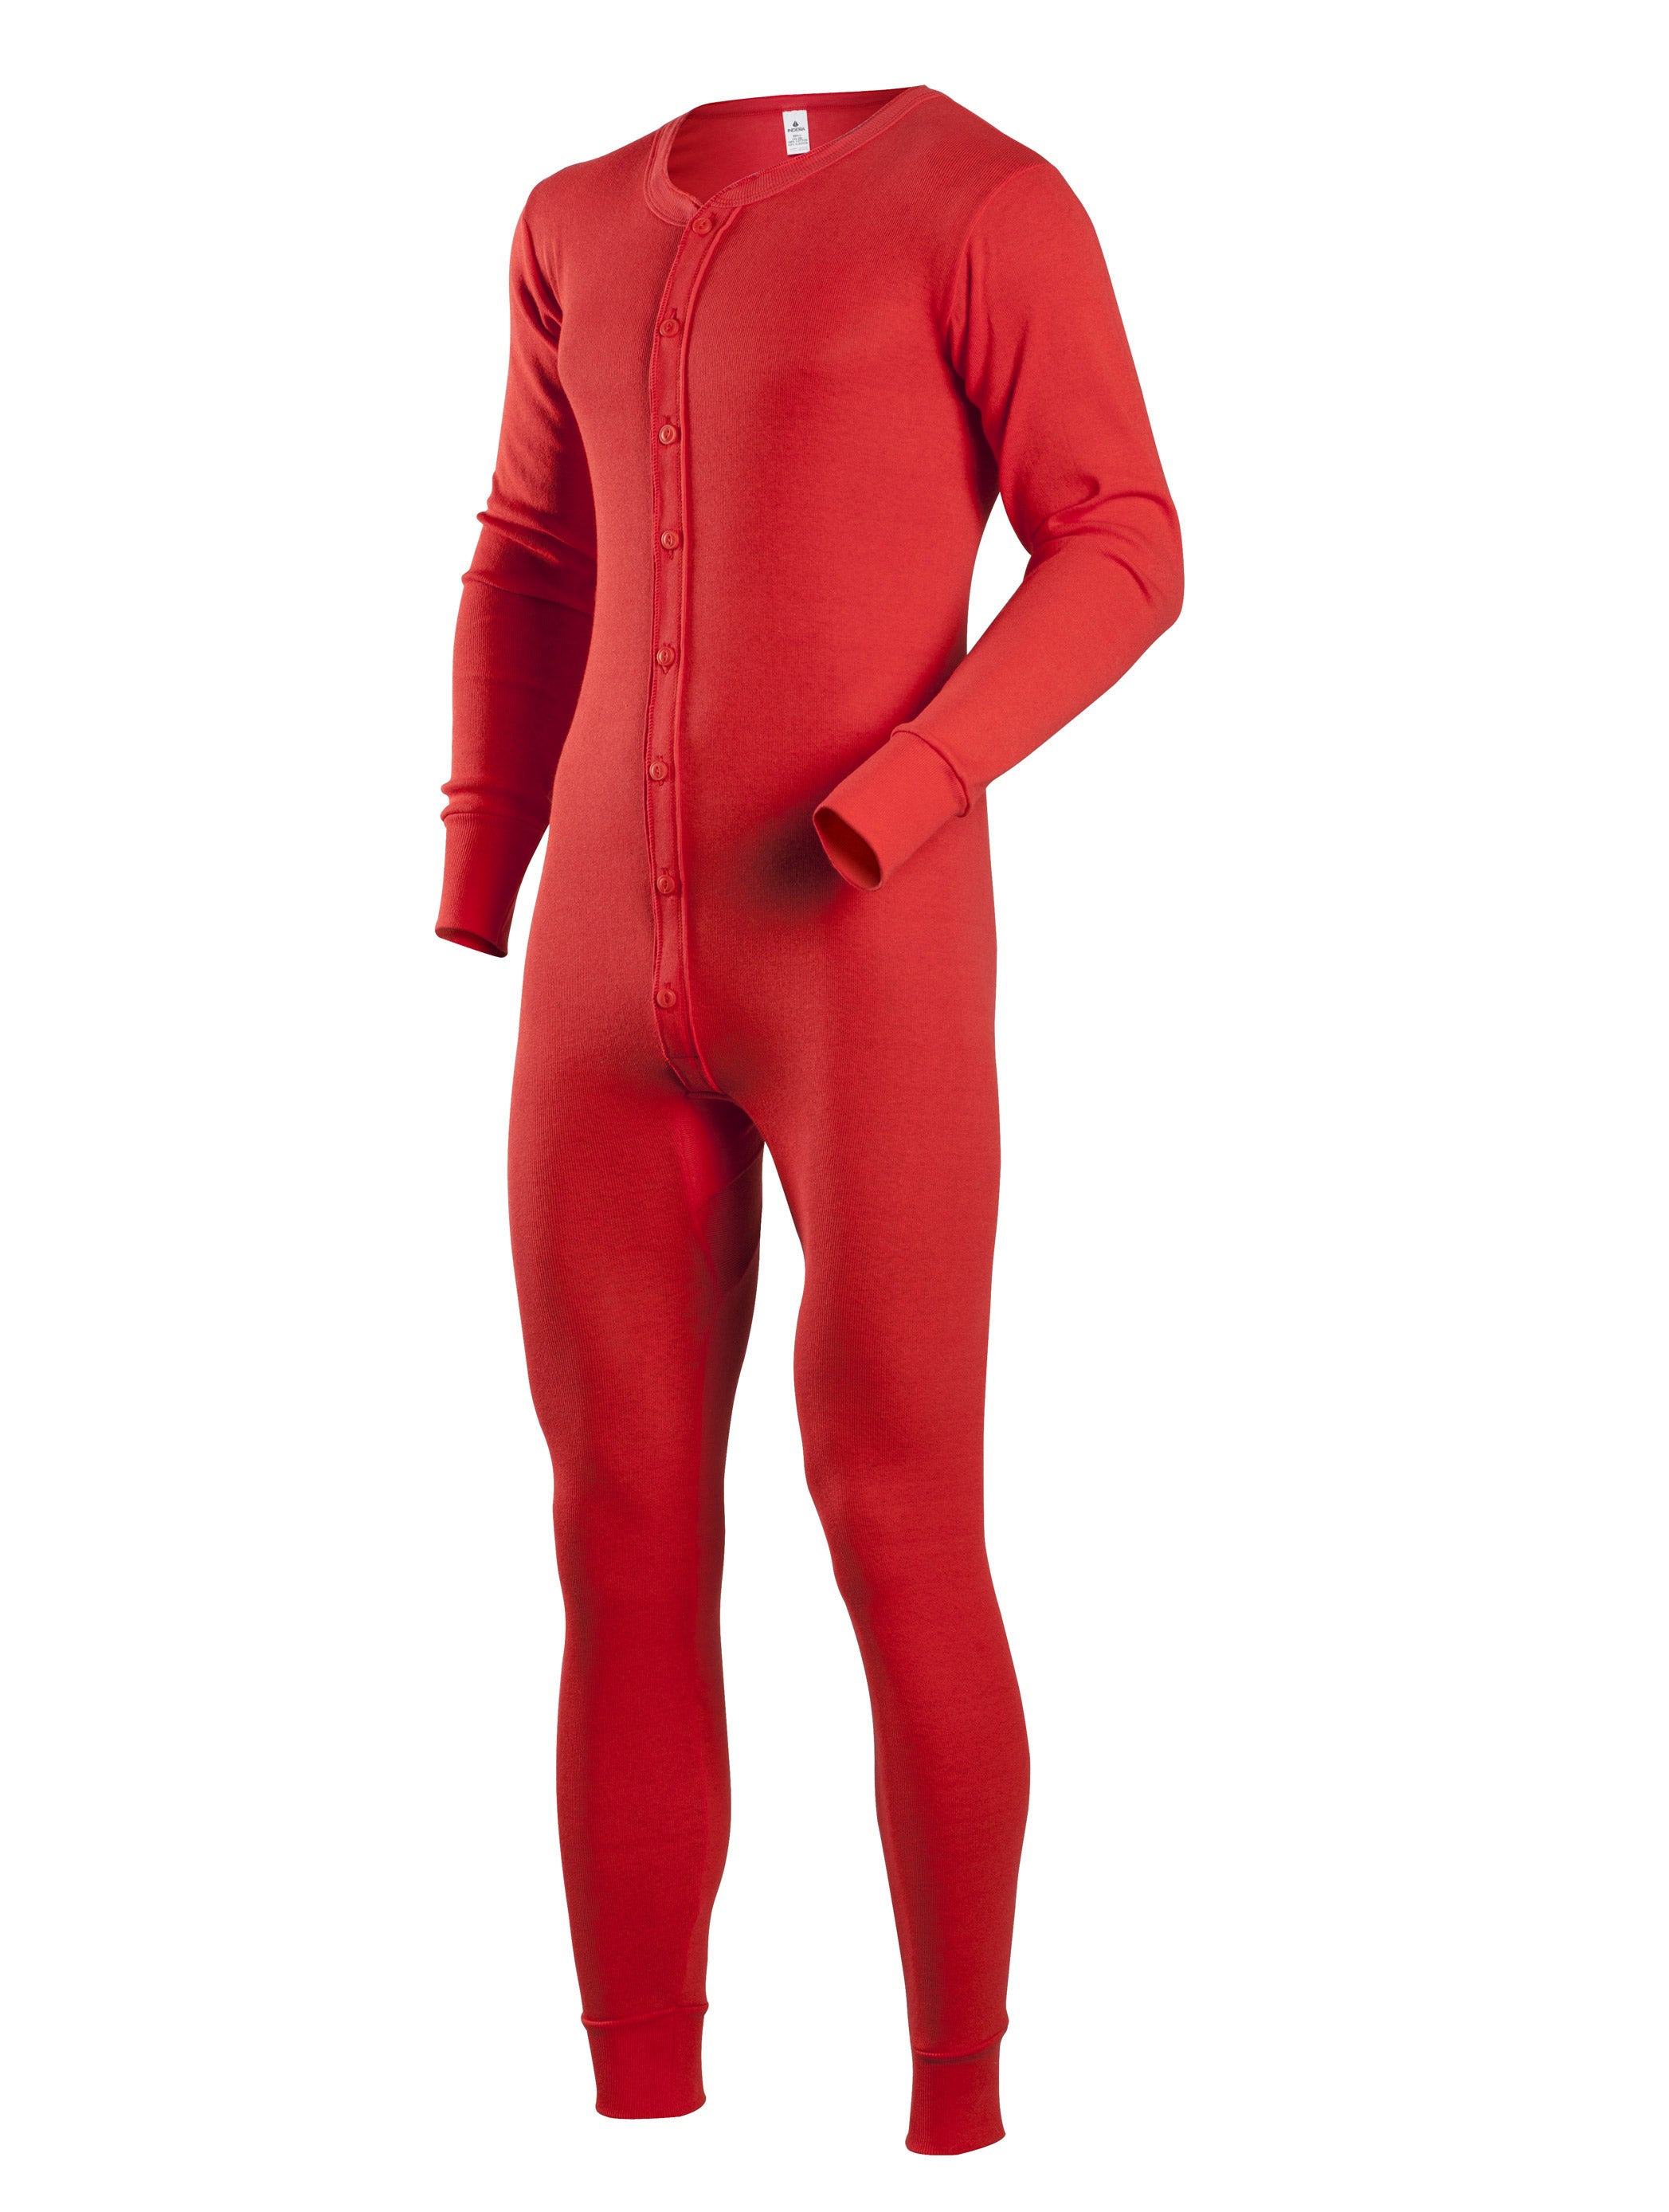 Coldmast Union Suits in Red - 865-B - Tall Man Sizes